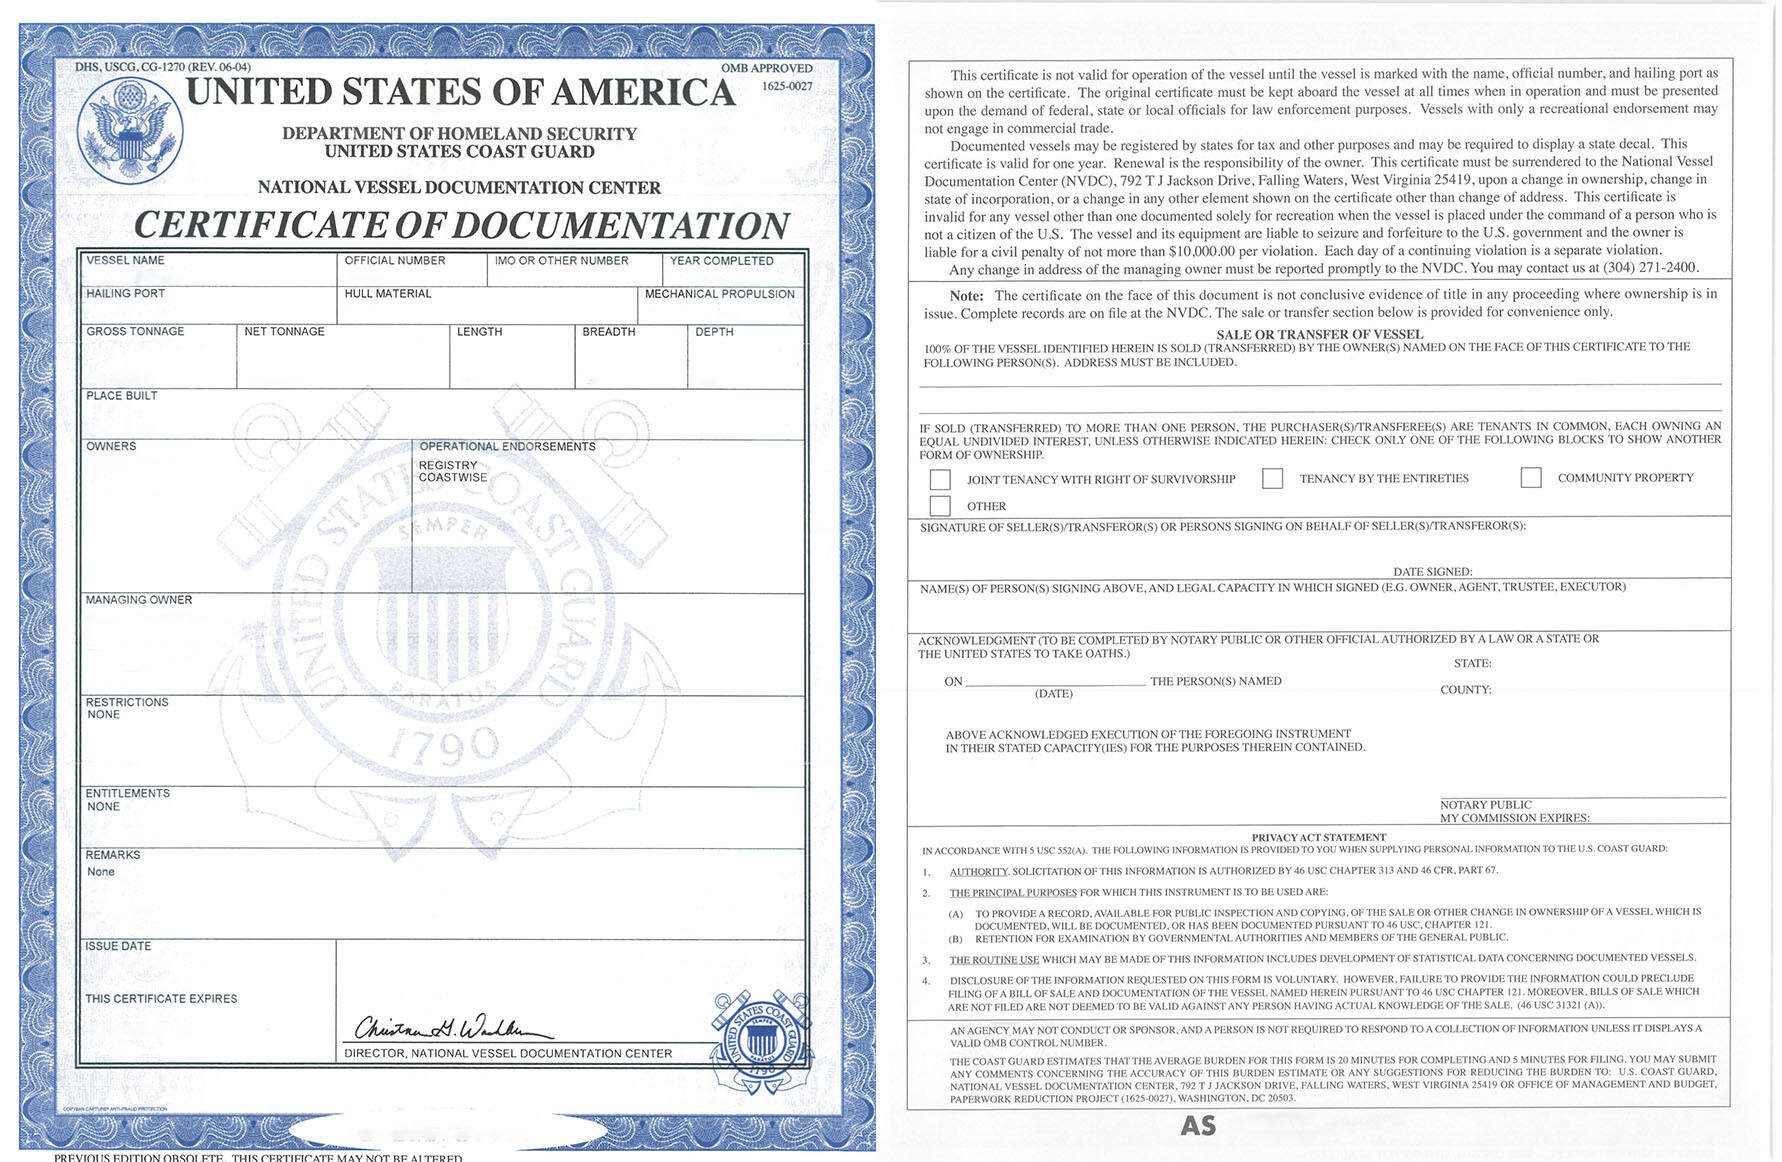 This is how the USCG Certificate of Documentation (COD) looks like